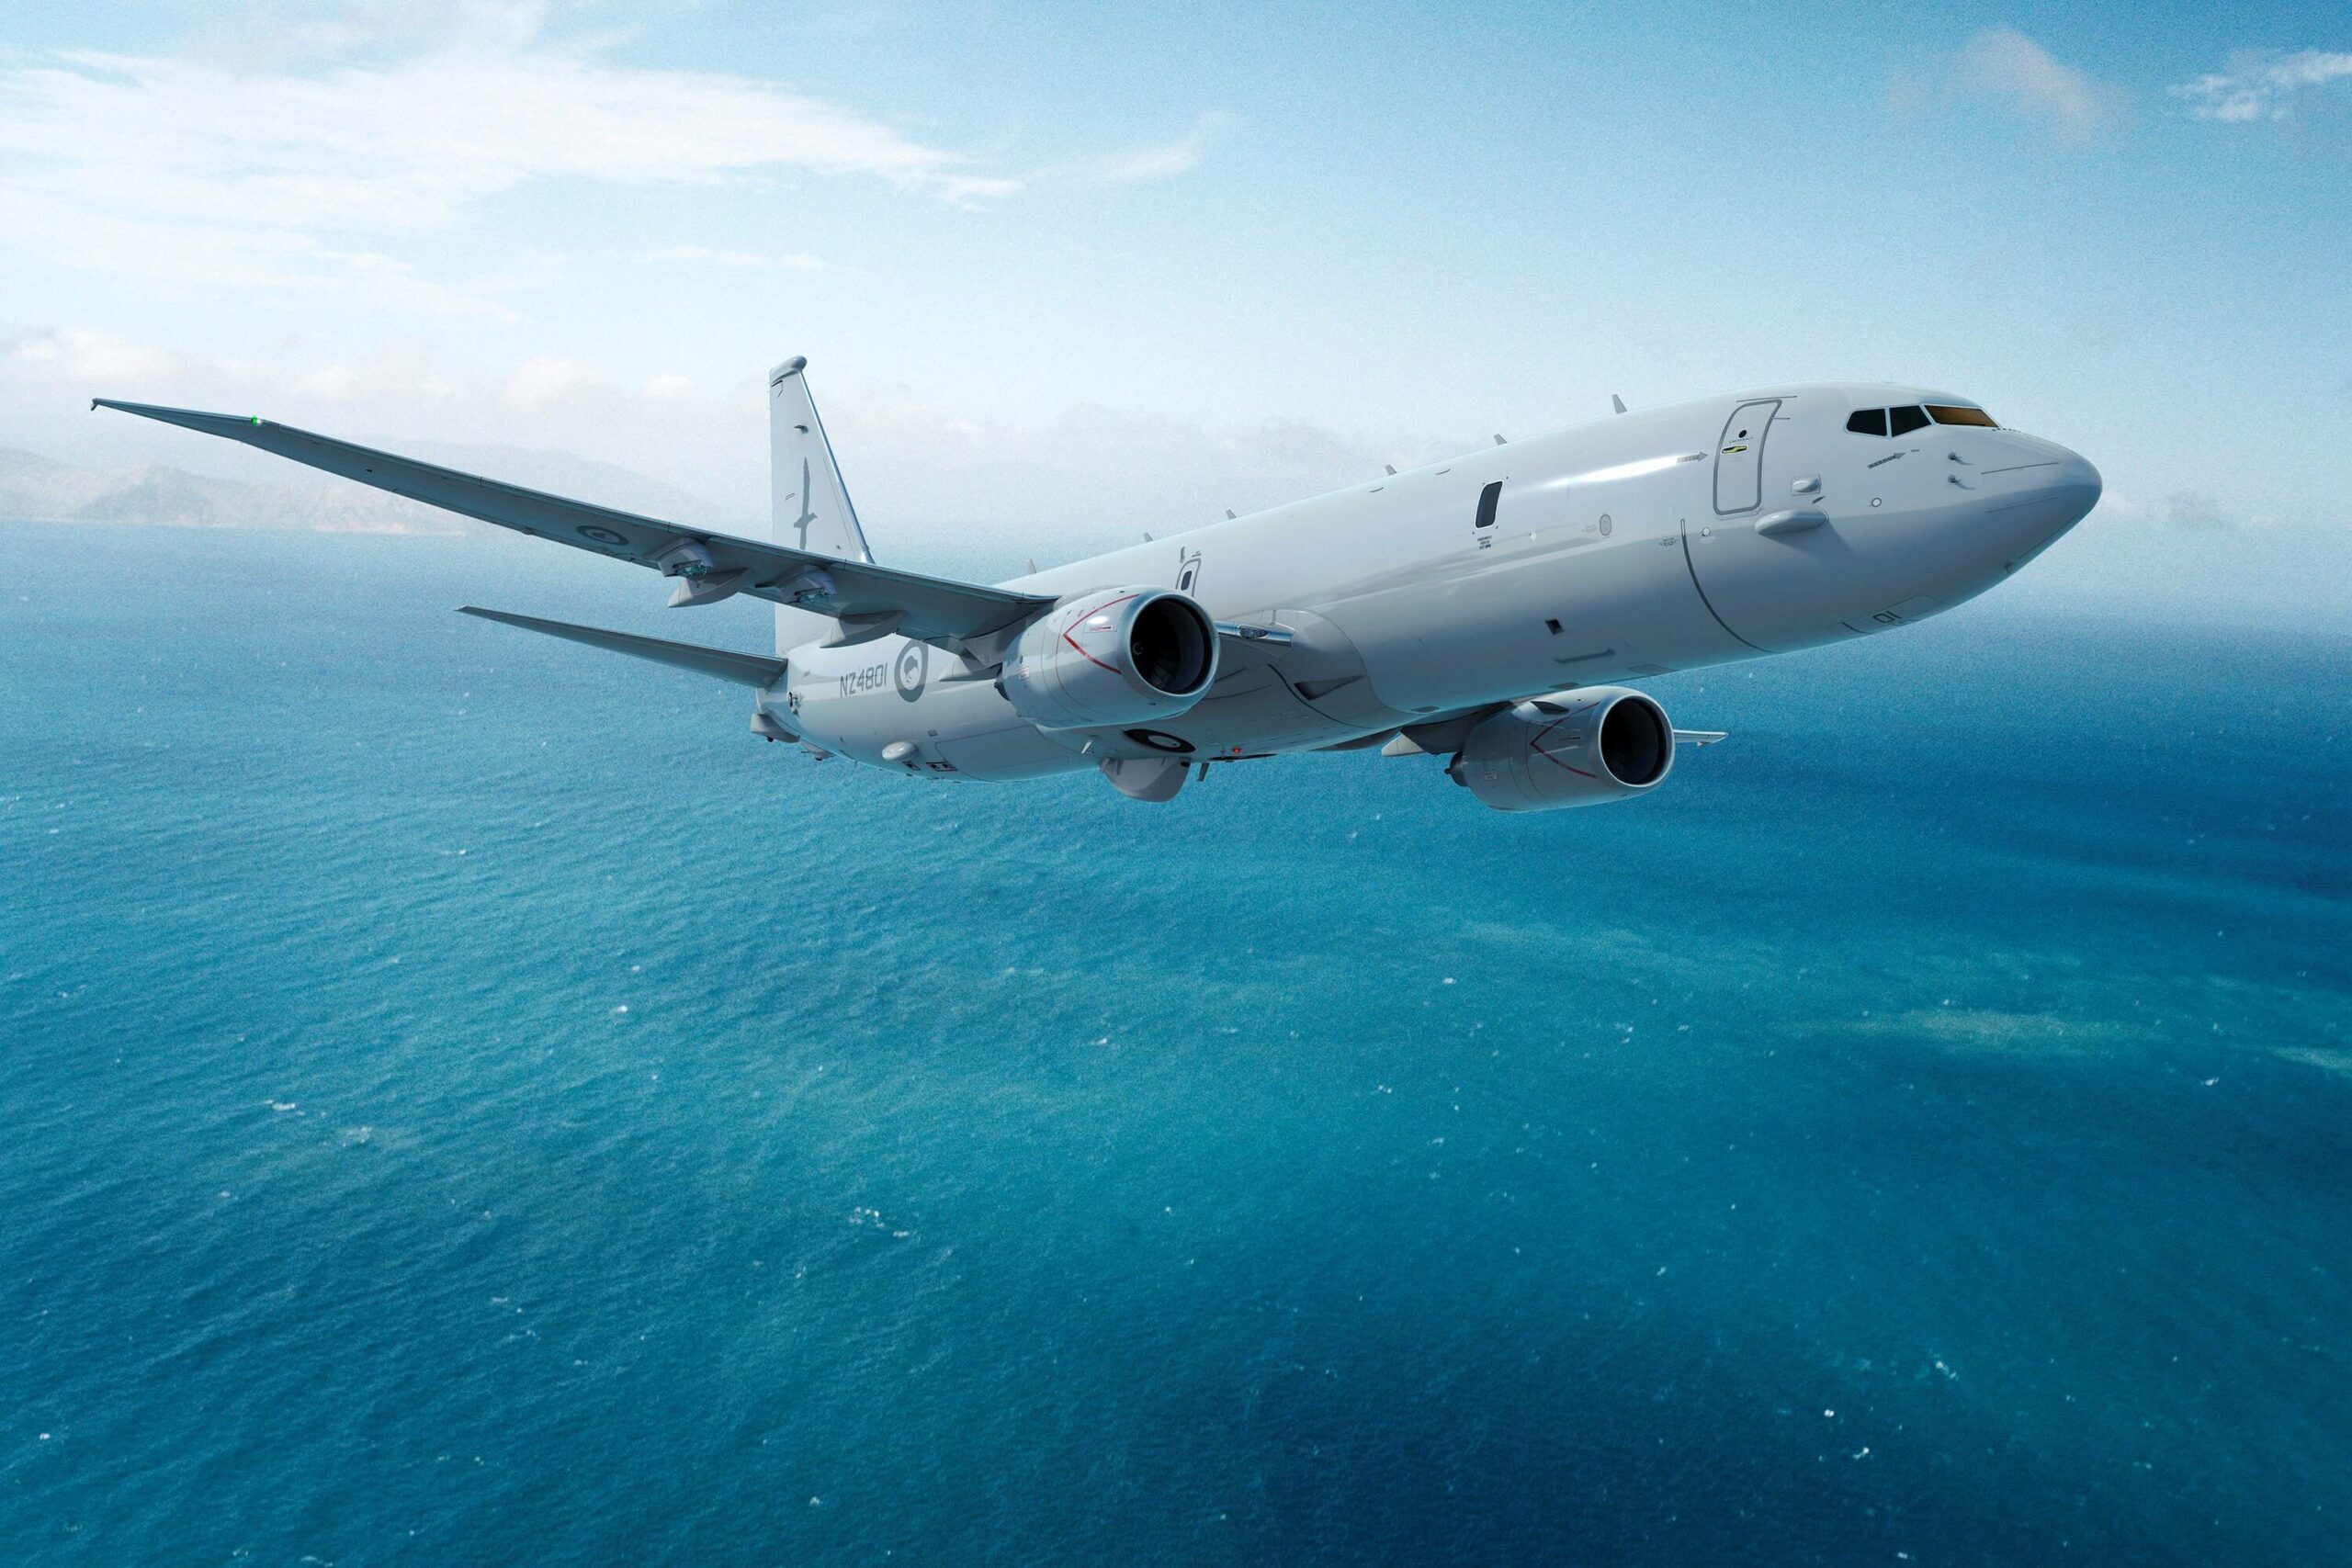 Artist impression of Royal New Zealand Air Force P-8A Aircraft